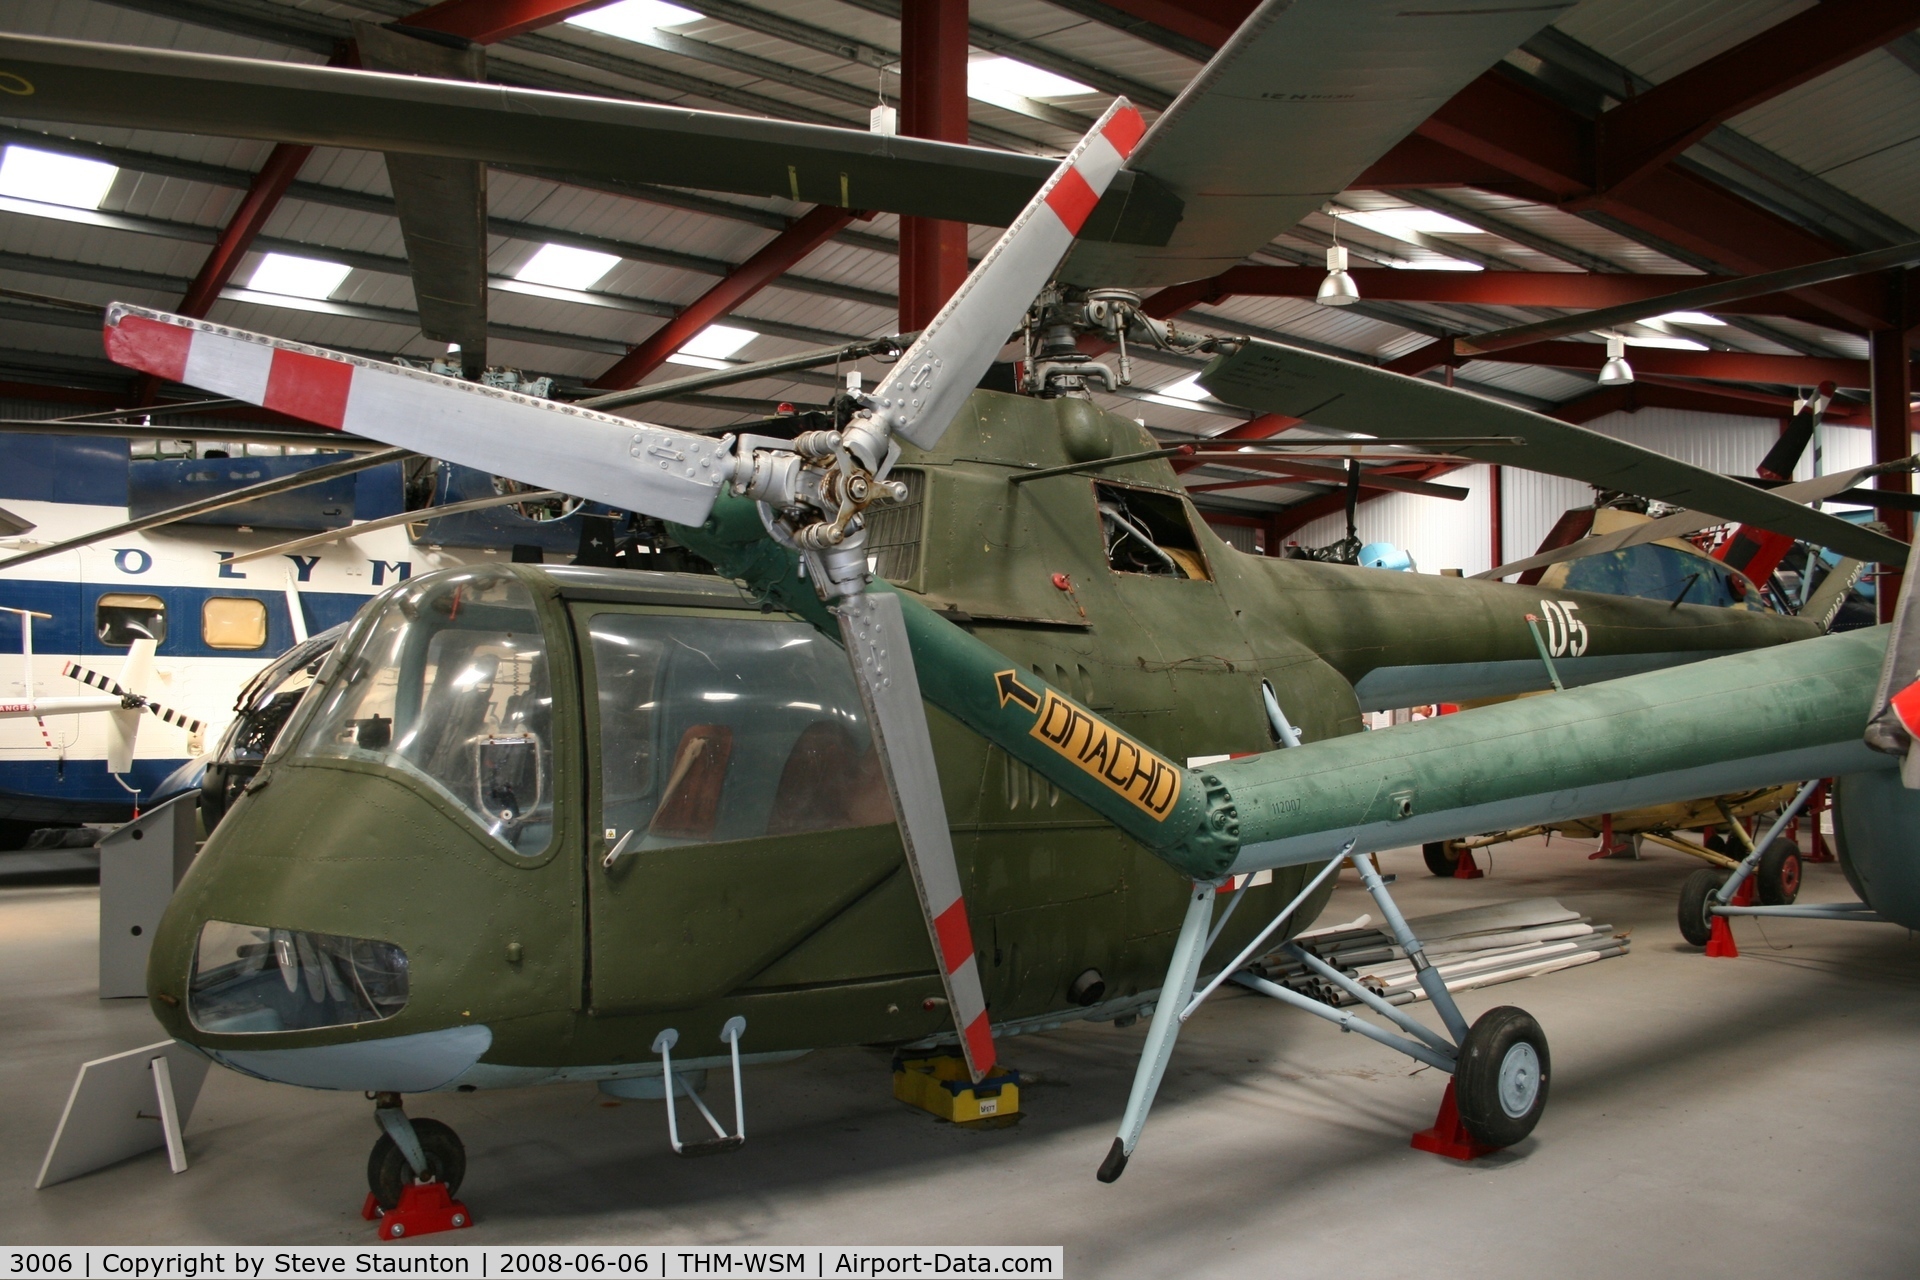 3006, 1961 PZL-Swidnik SM-2 C/N S2-03006, Taken at the Helicopter Museum (http://www.helicoptermuseum.co.uk/)